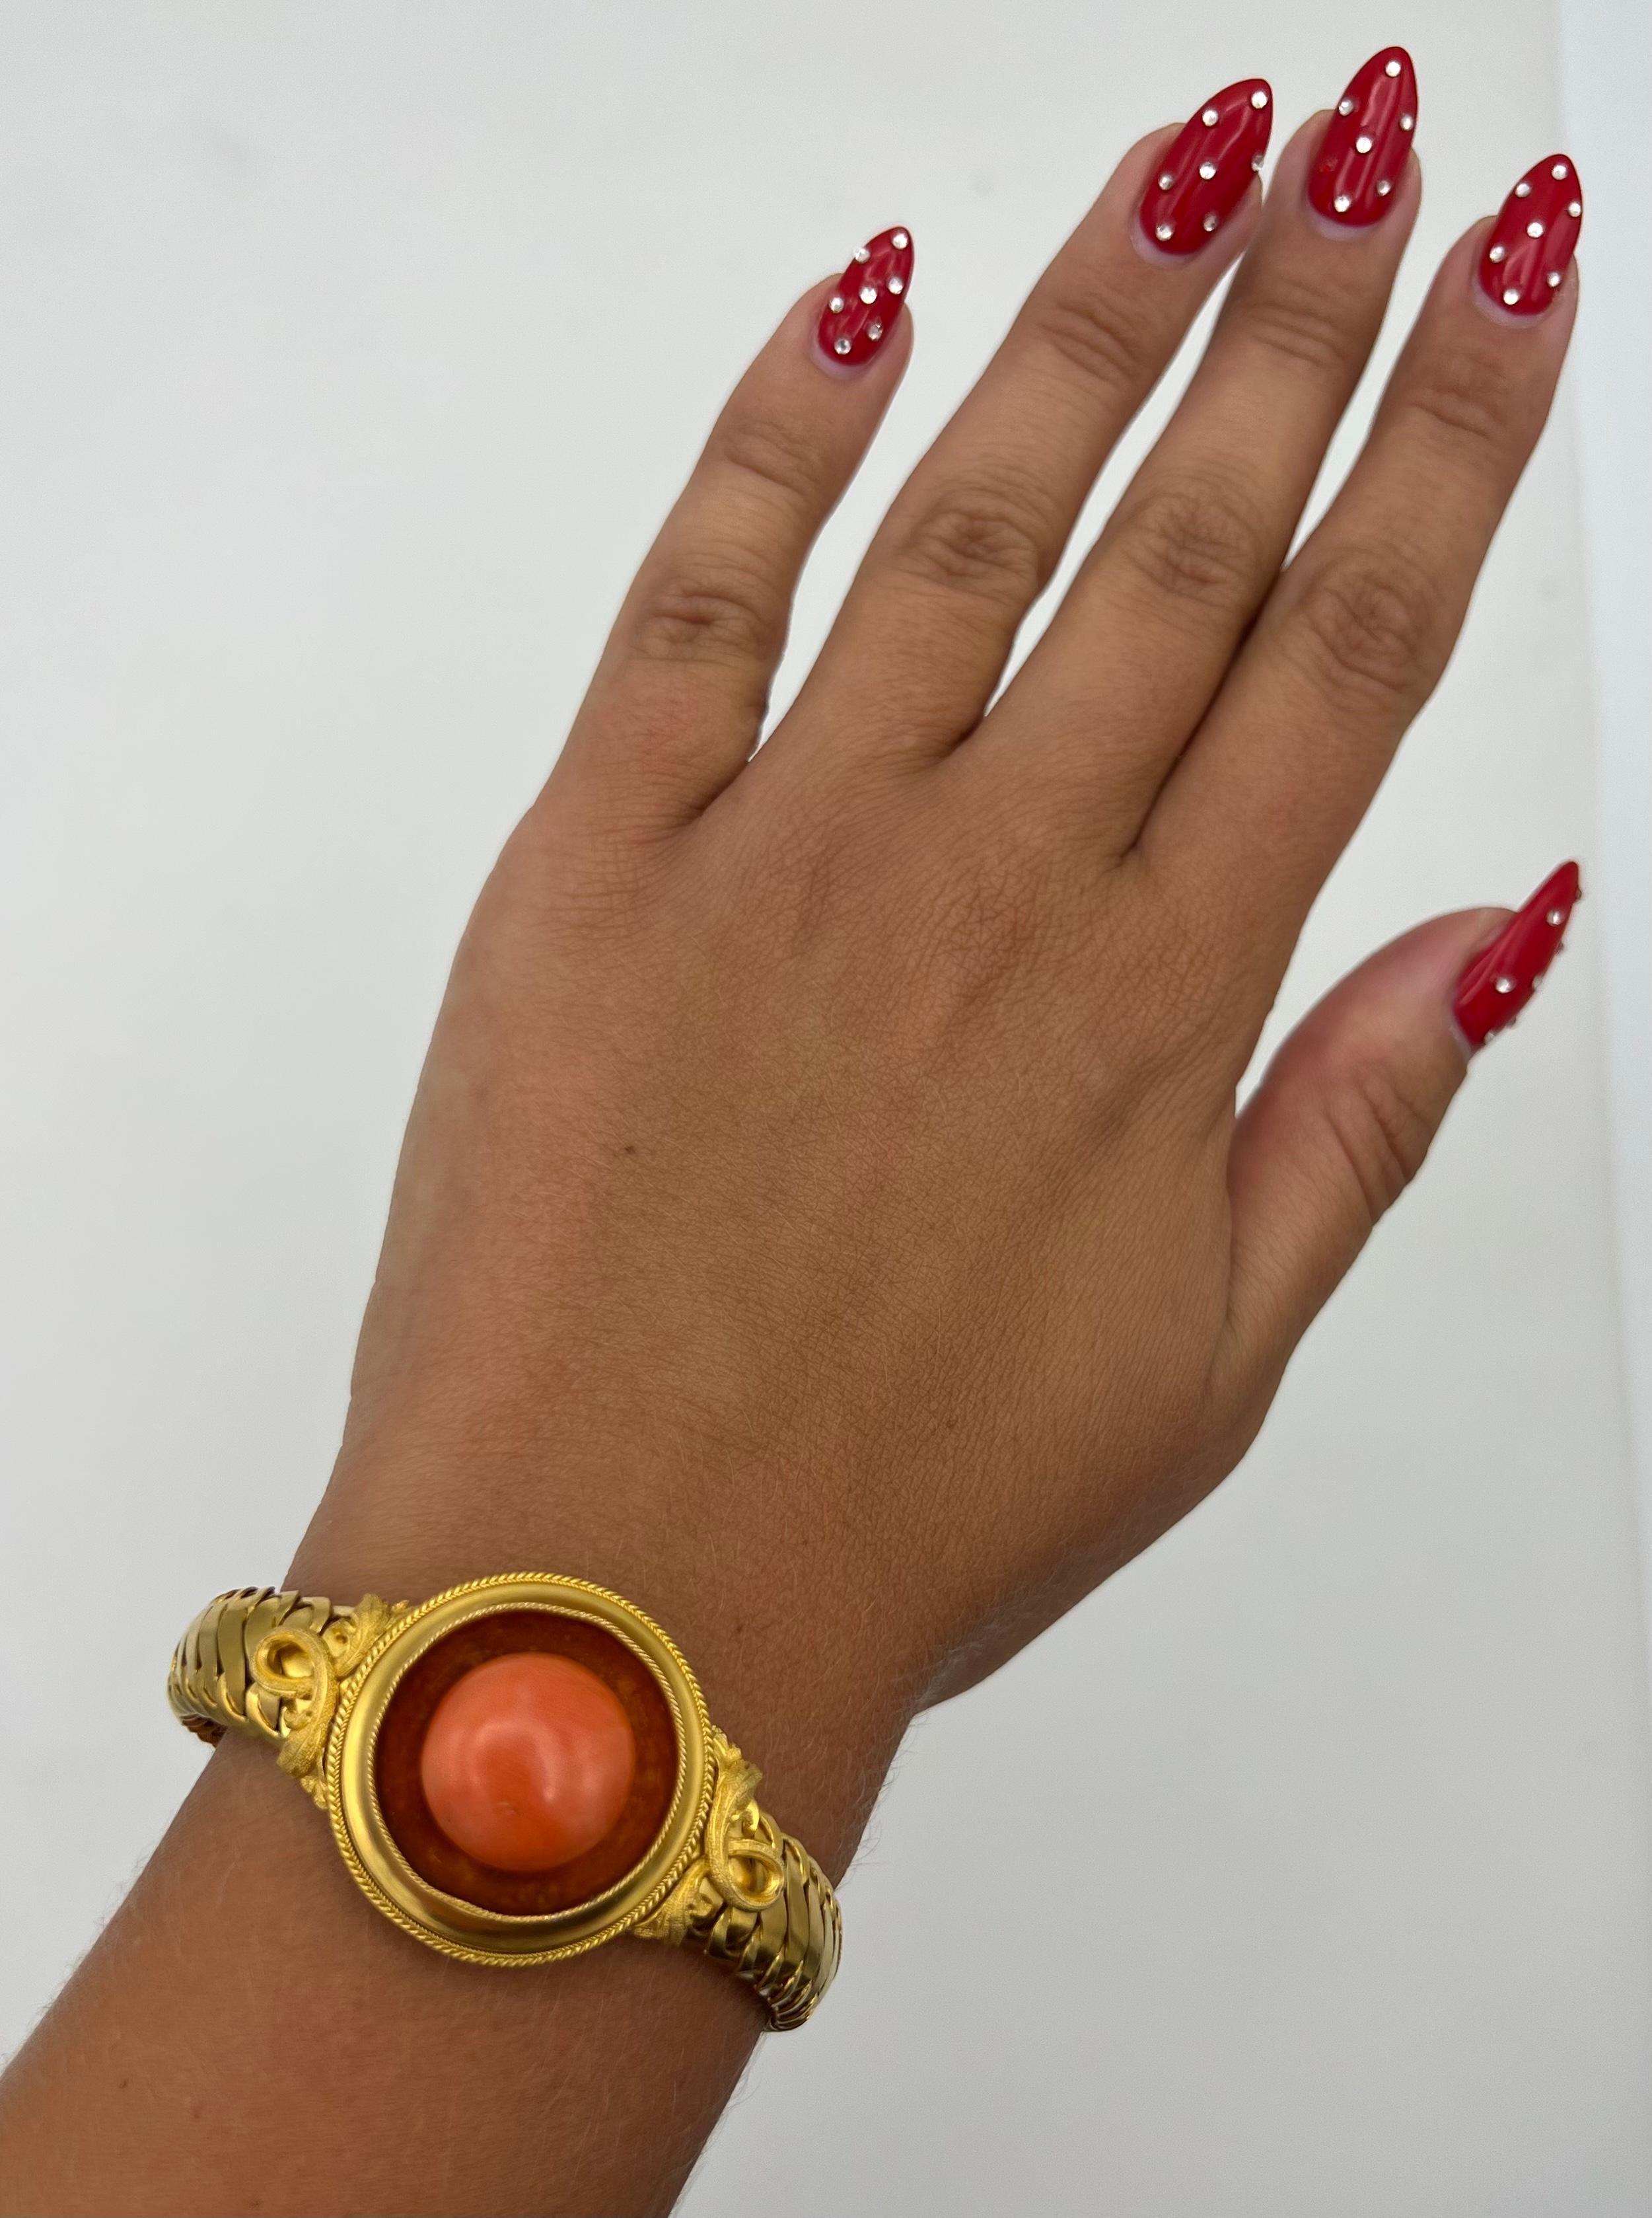 - 14 karat yellow gold
- Cabochon coral, approx 15.20 mm 
- Featuring chain finish bracelet 
- Boxed in clasp closure with safety chain 

Total weight is 37.4 grams.
Measurments 6.5 inches long and 1 inch wide.
Hallmarks: maker’s mark RD.